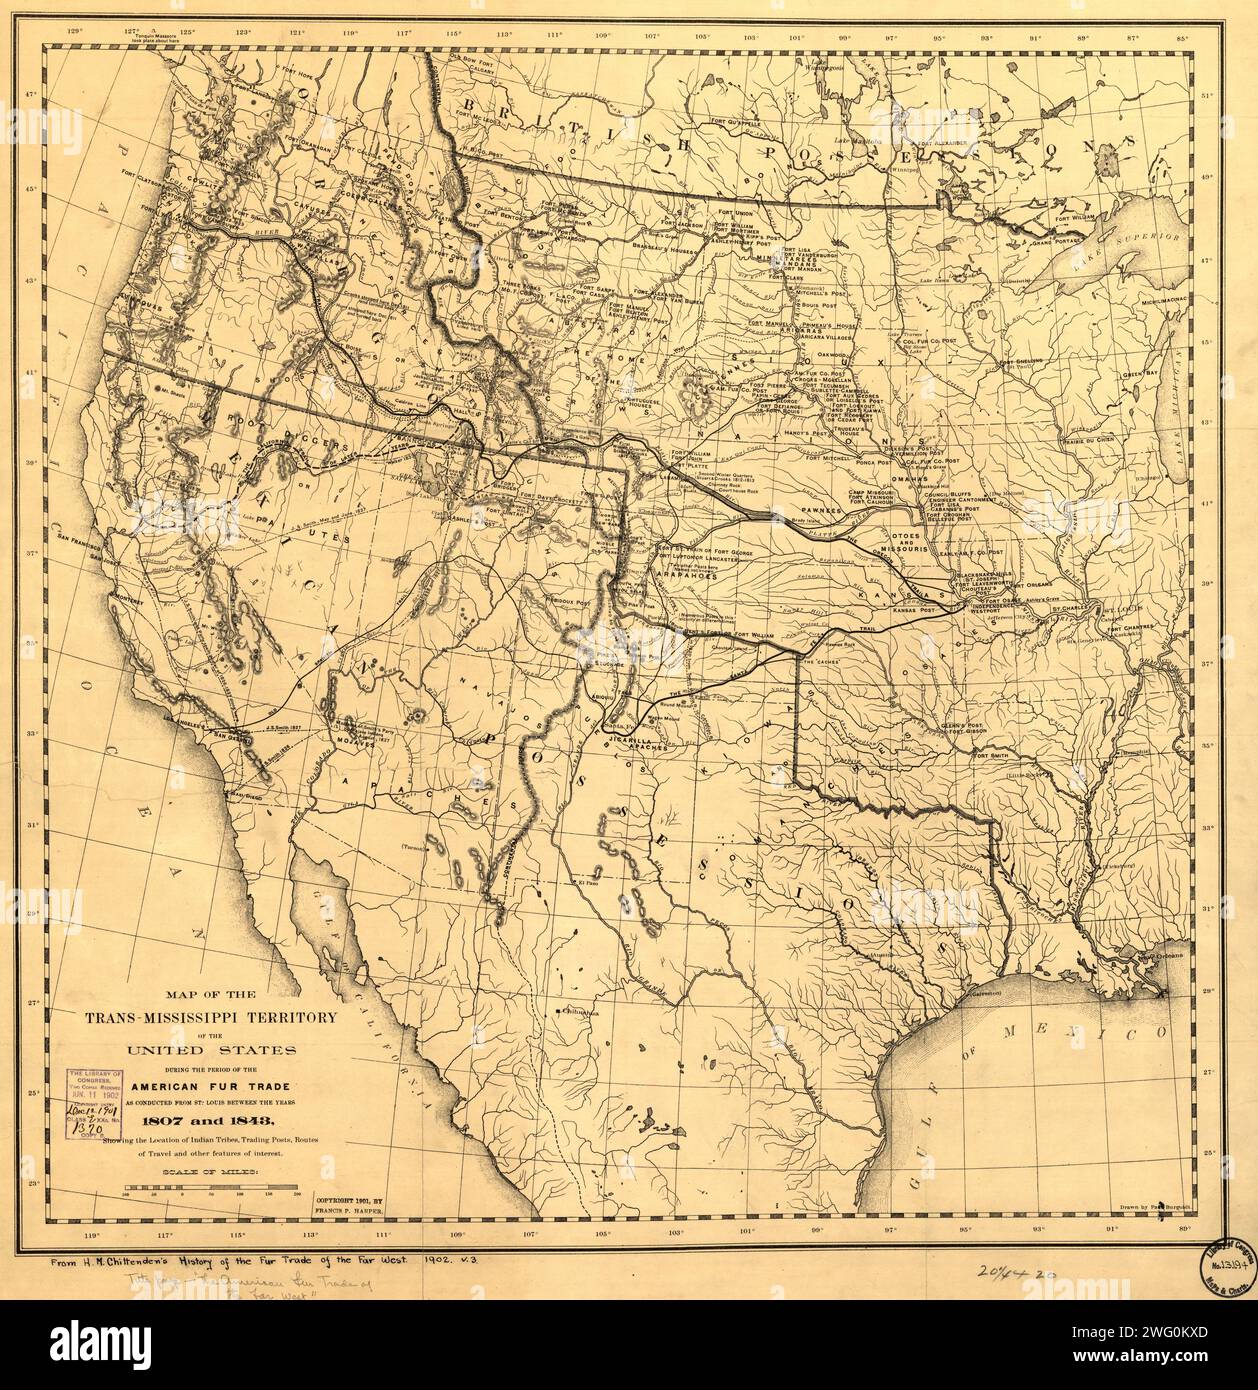 Map of the Trans-Mississippi of the United States during the period of the American fur trade as conducted from St. Louis between the years 1807 and 1843, 1902. This map, published in 1902 in H.M. Chittenden's History of the Fur Trade of the Far West, shows major cartographic features of the American West in the early 19th century, including the location of key Native American populations, forts, trading posts, and physical features, such as mountains and rivers. French voyageurs pioneered fur trading and trapping in Canada and the American West before the Louisiana Purchase of 1803, but the b Stock Photo